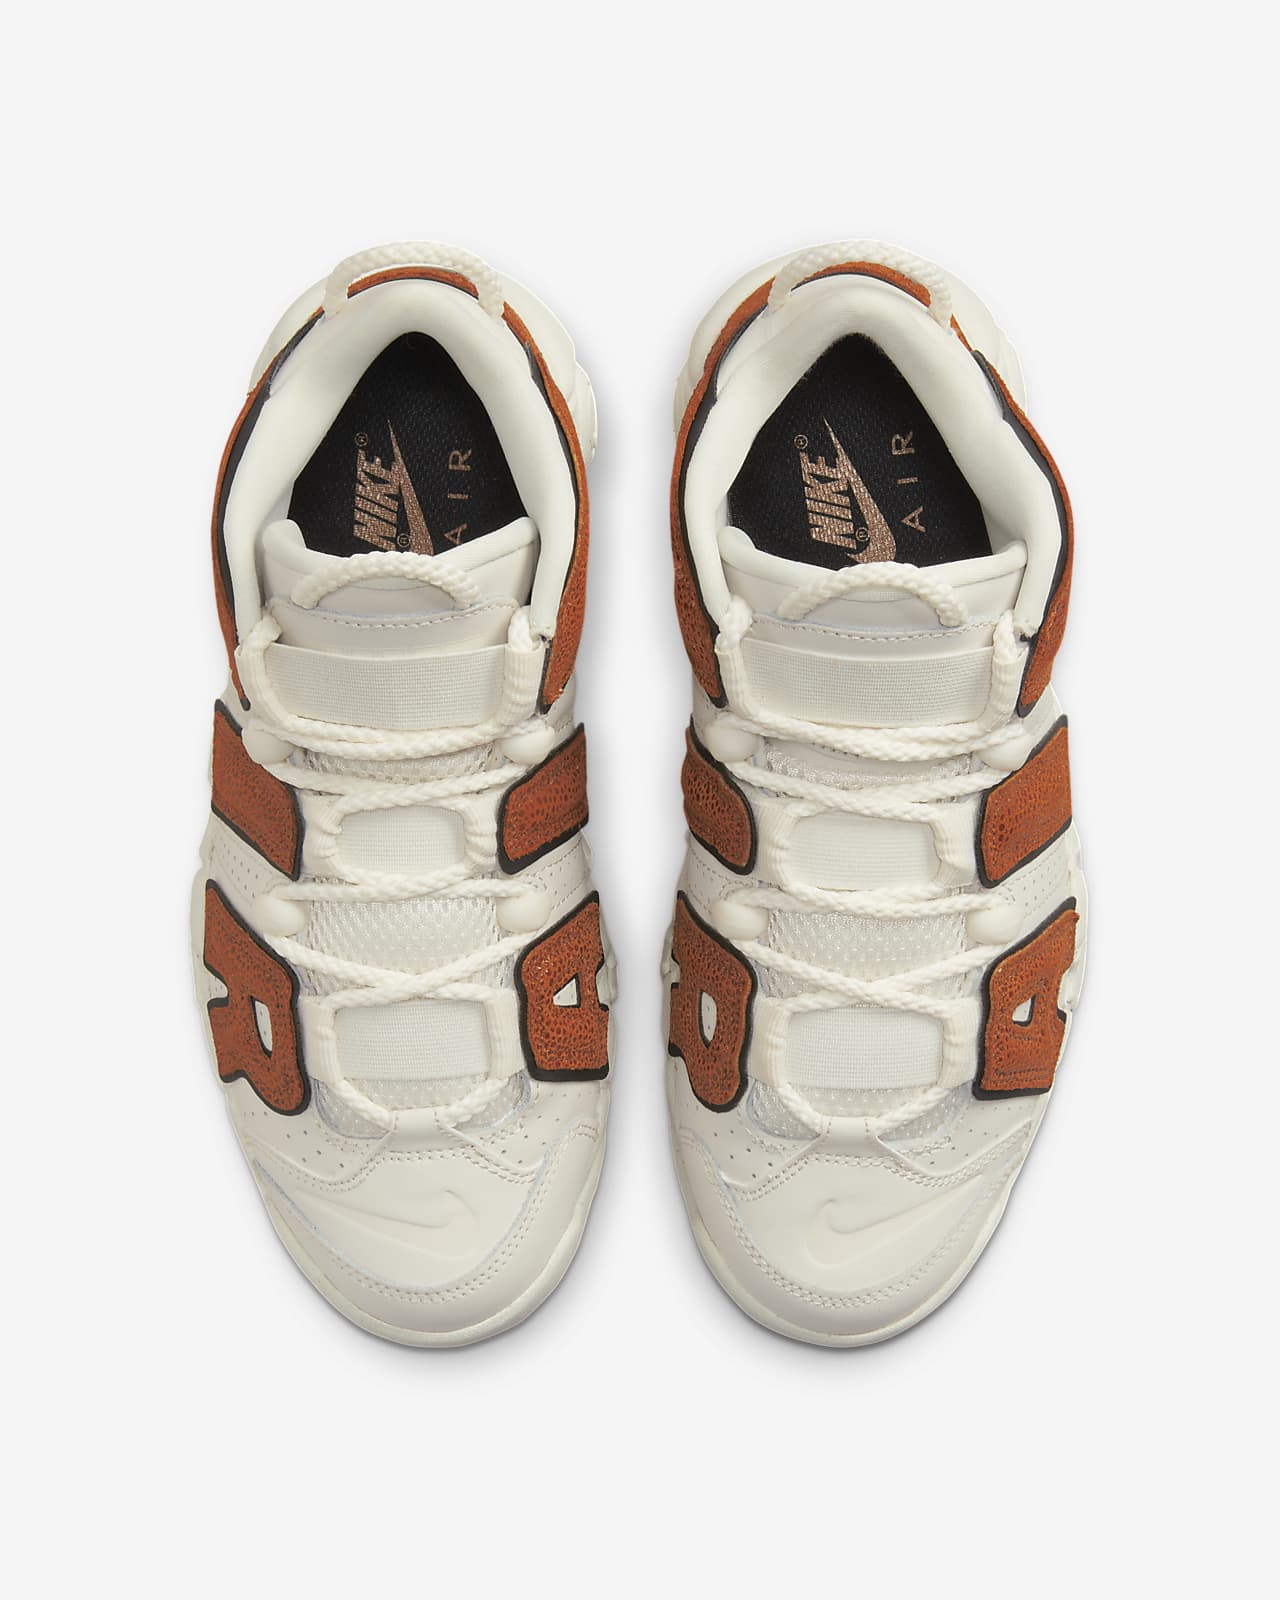 Nike Air More Uptempo Baby/Toddler Shoes.